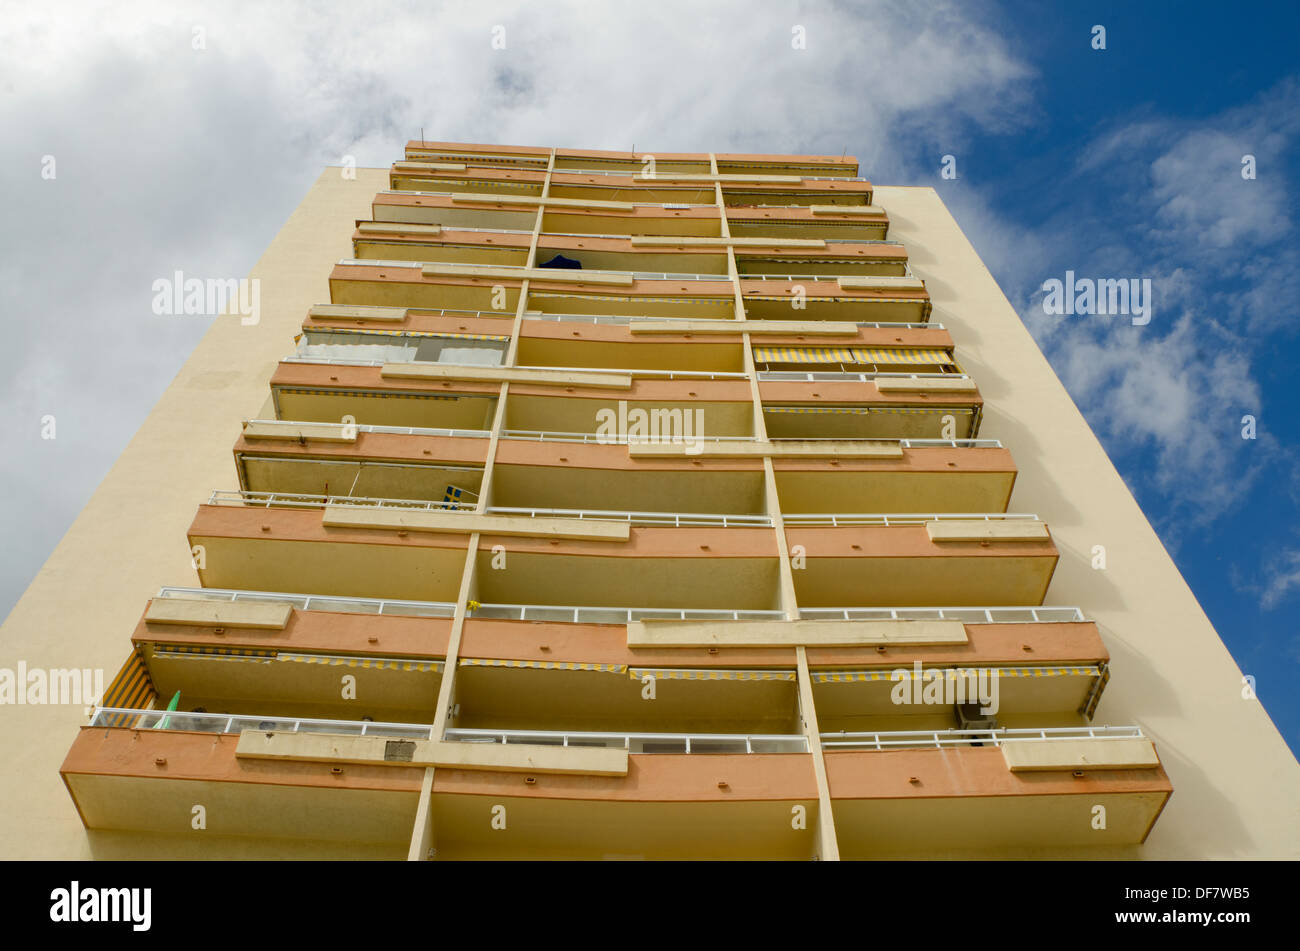 Old high rise tower block on the Costa del sol. Spain. Stock Photo